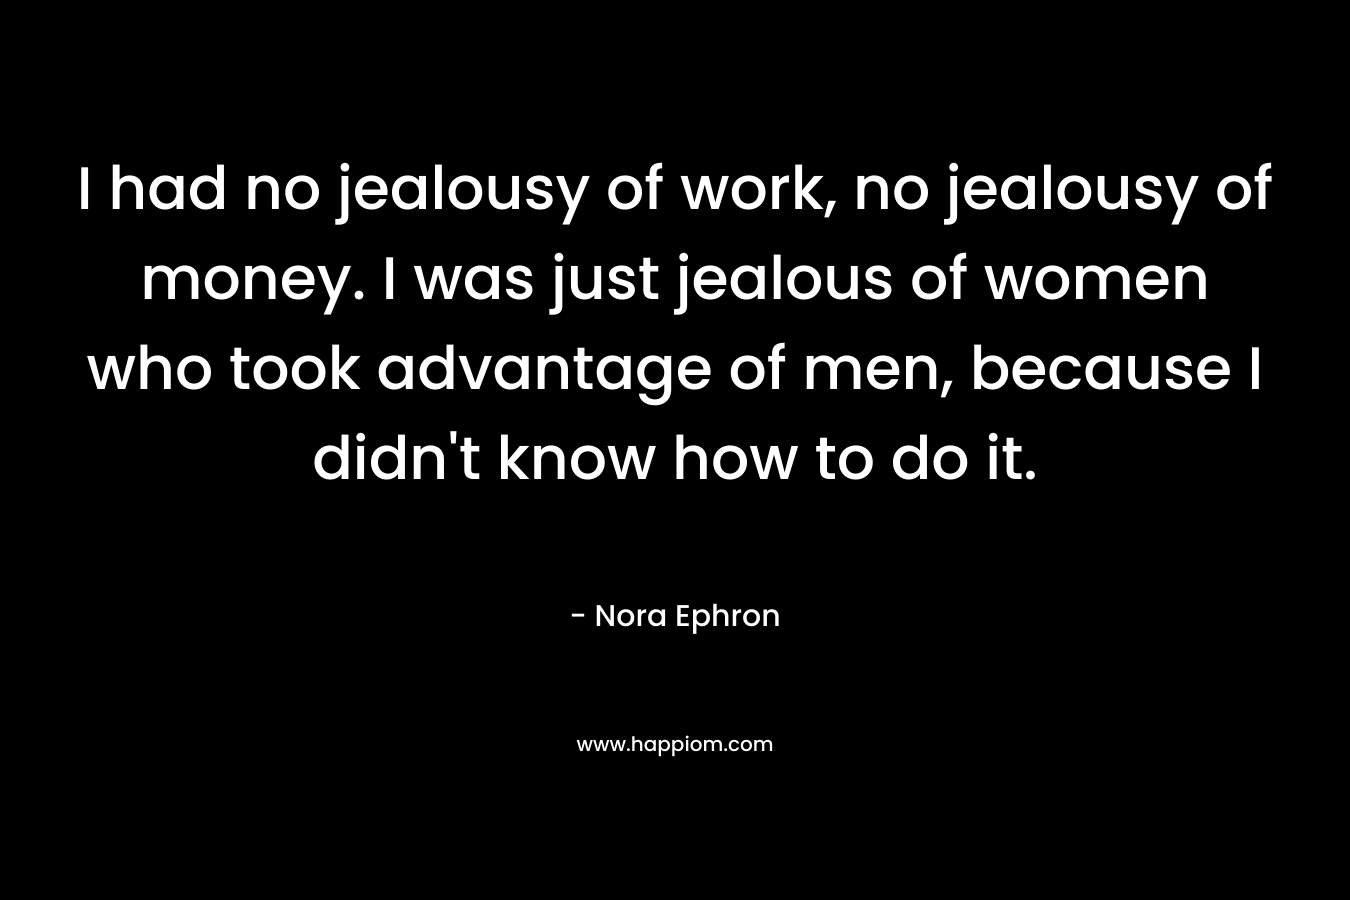 I had no jealousy of work, no jealousy of money. I was just jealous of women who took advantage of men, because I didn't know how to do it.